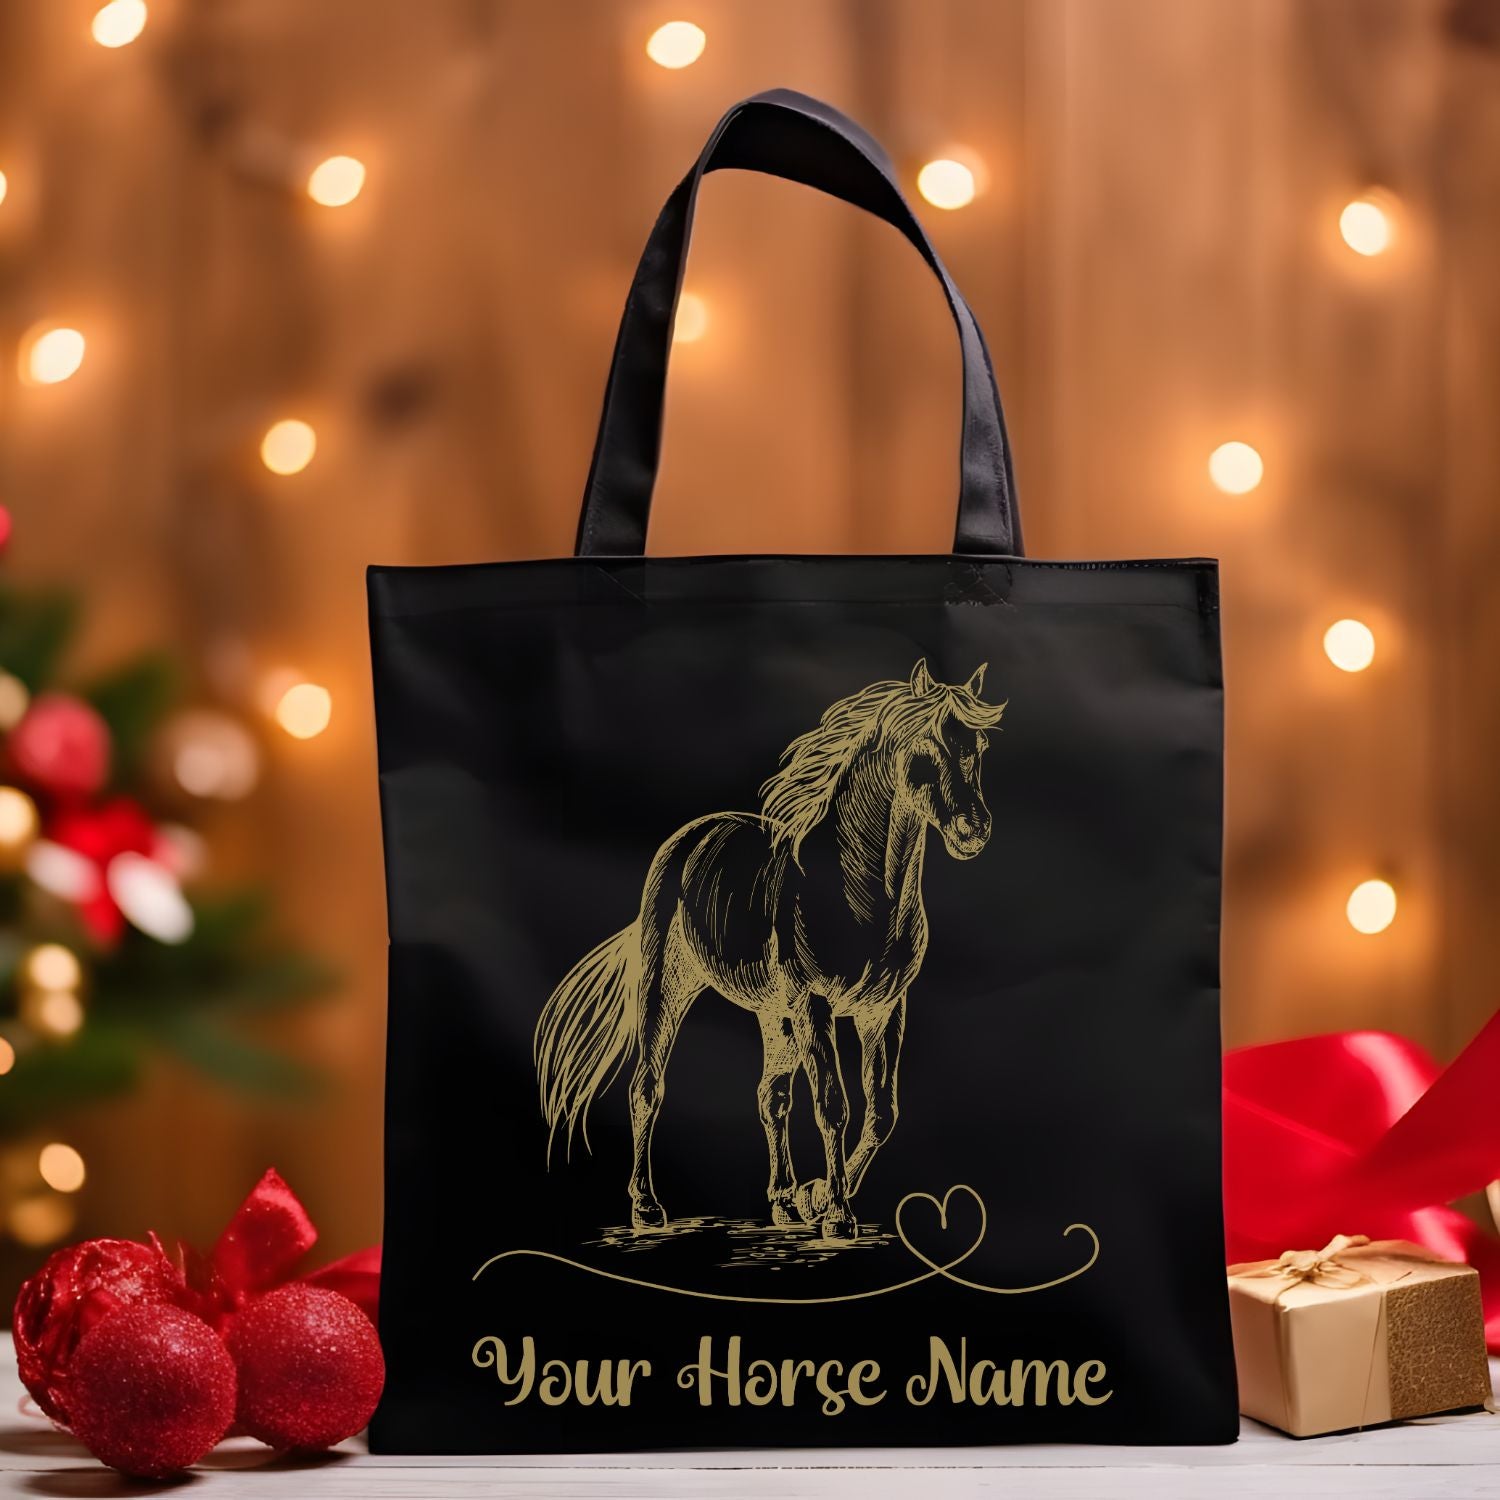 Personalized Horse Tote Bag - Unique Christmas Gift for Horse Lovers - Equestrian Gifts Accessories   